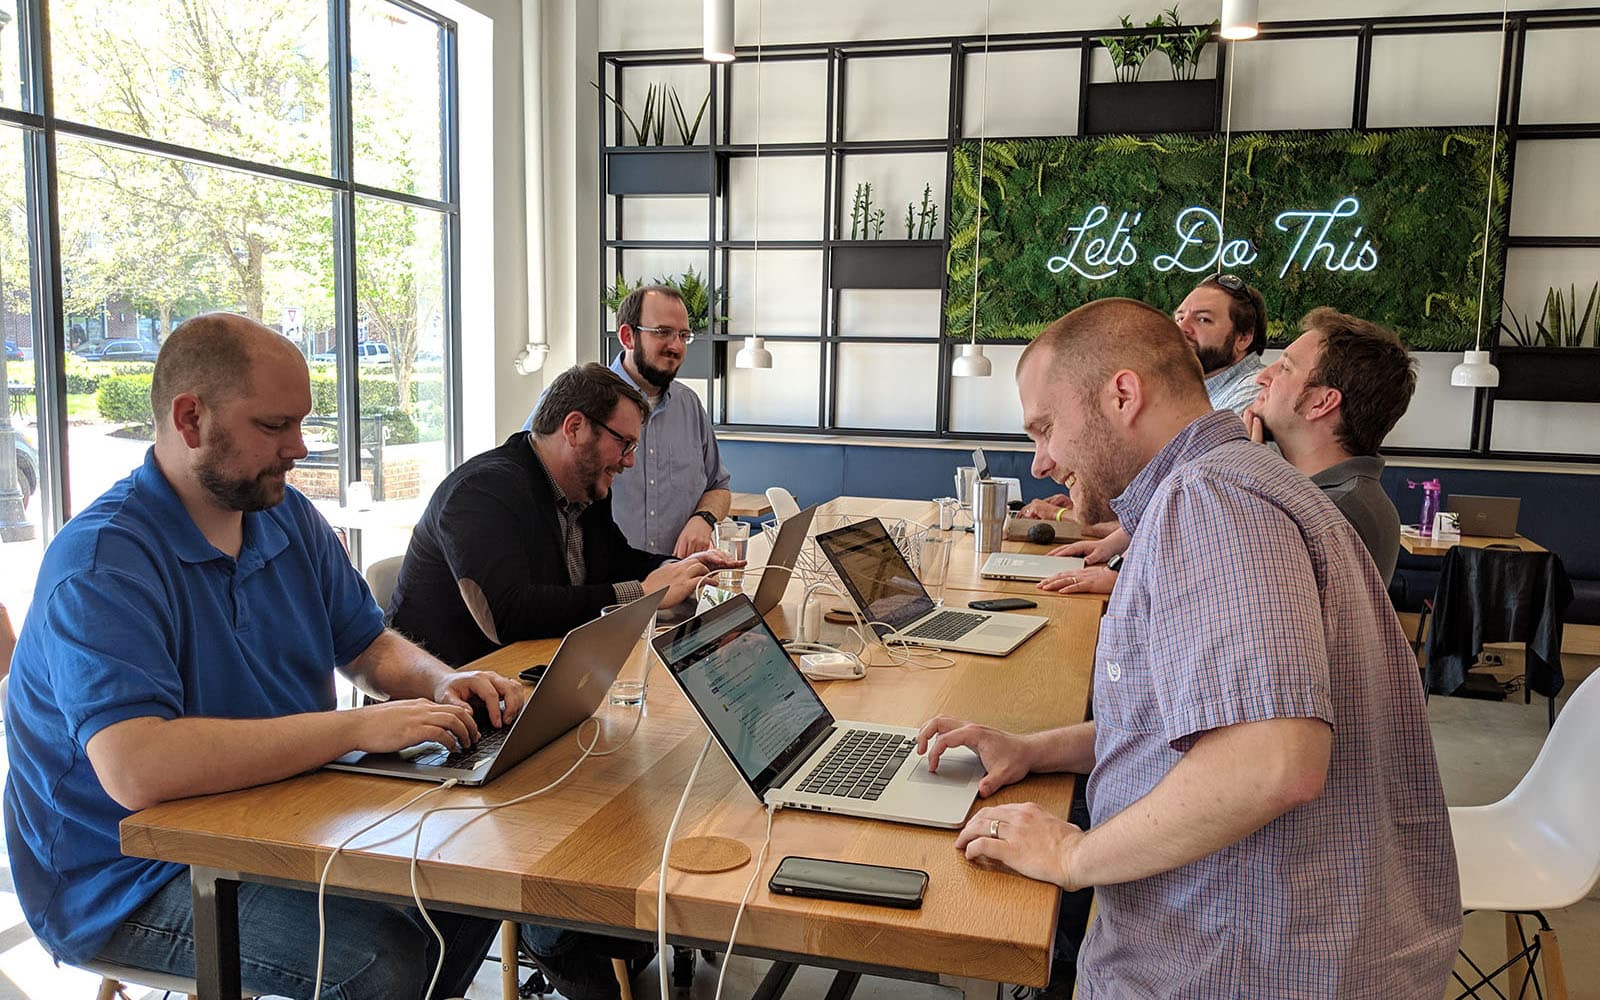 A few of the team working together at a recent co-working day